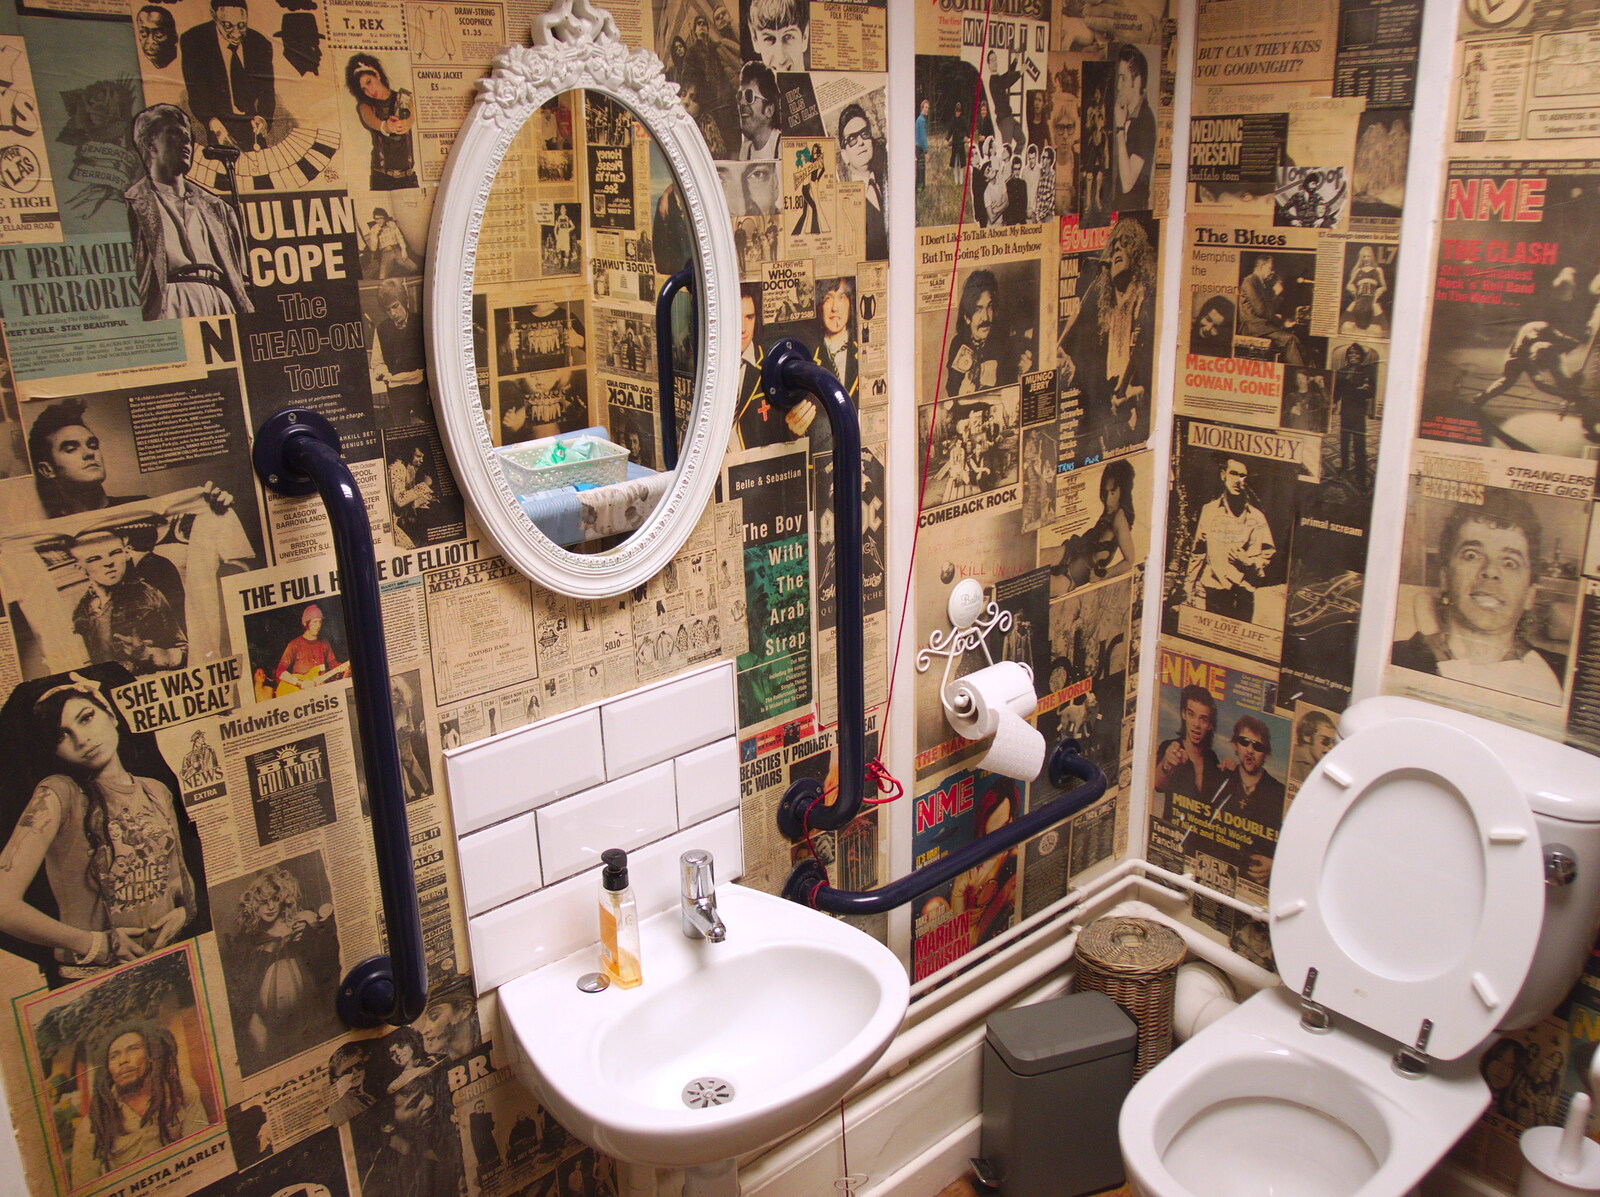 The toilets are cool, with NME covers all over from A Musical Night on Mill Road, Cambridge - 8th September 2019